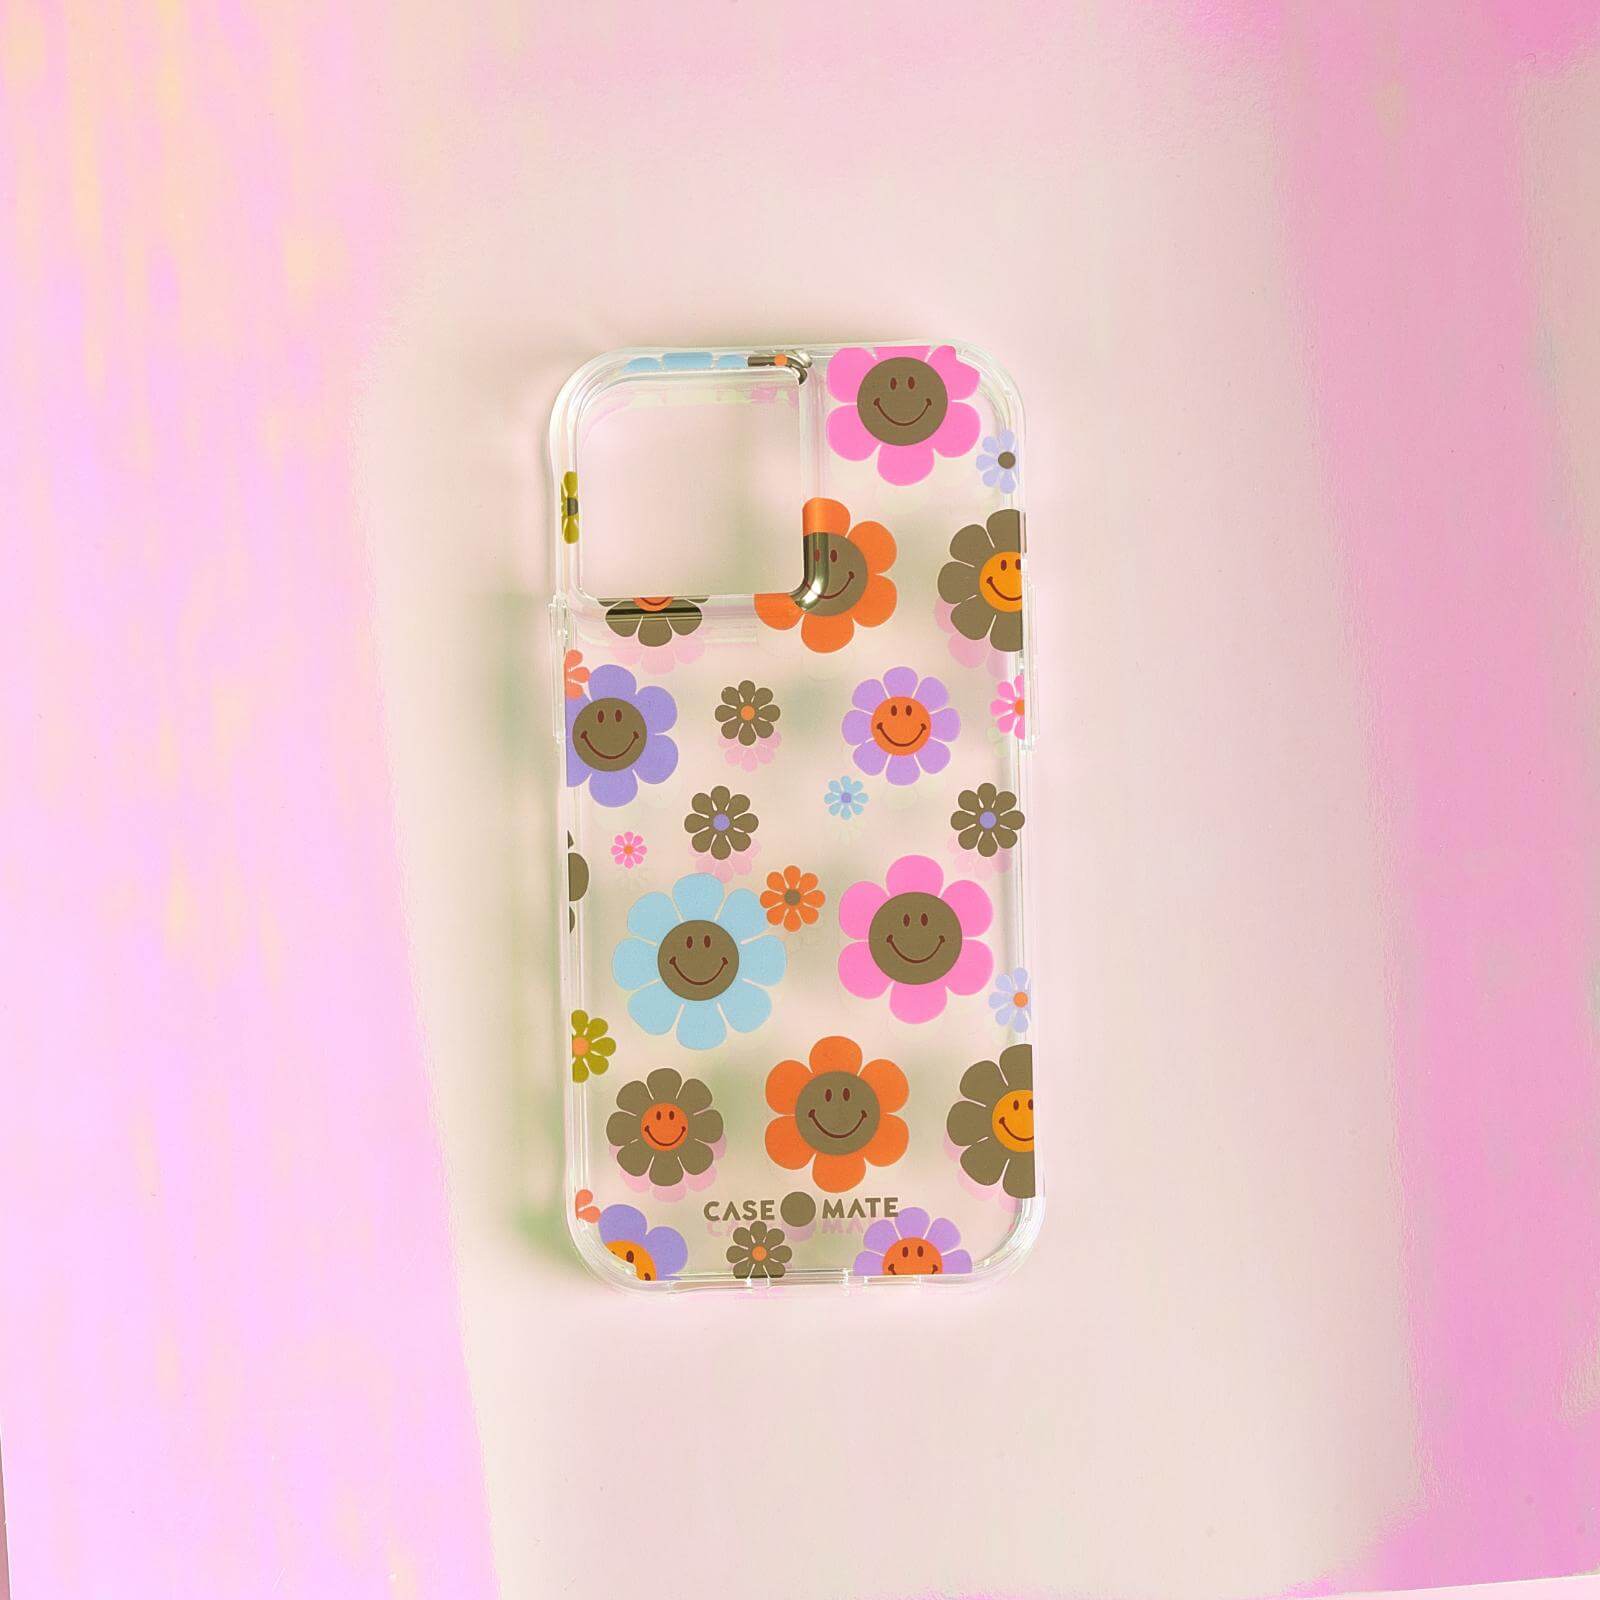 Retro flowers case for iPhone 13 mini on pink background. color::Retro Flowers